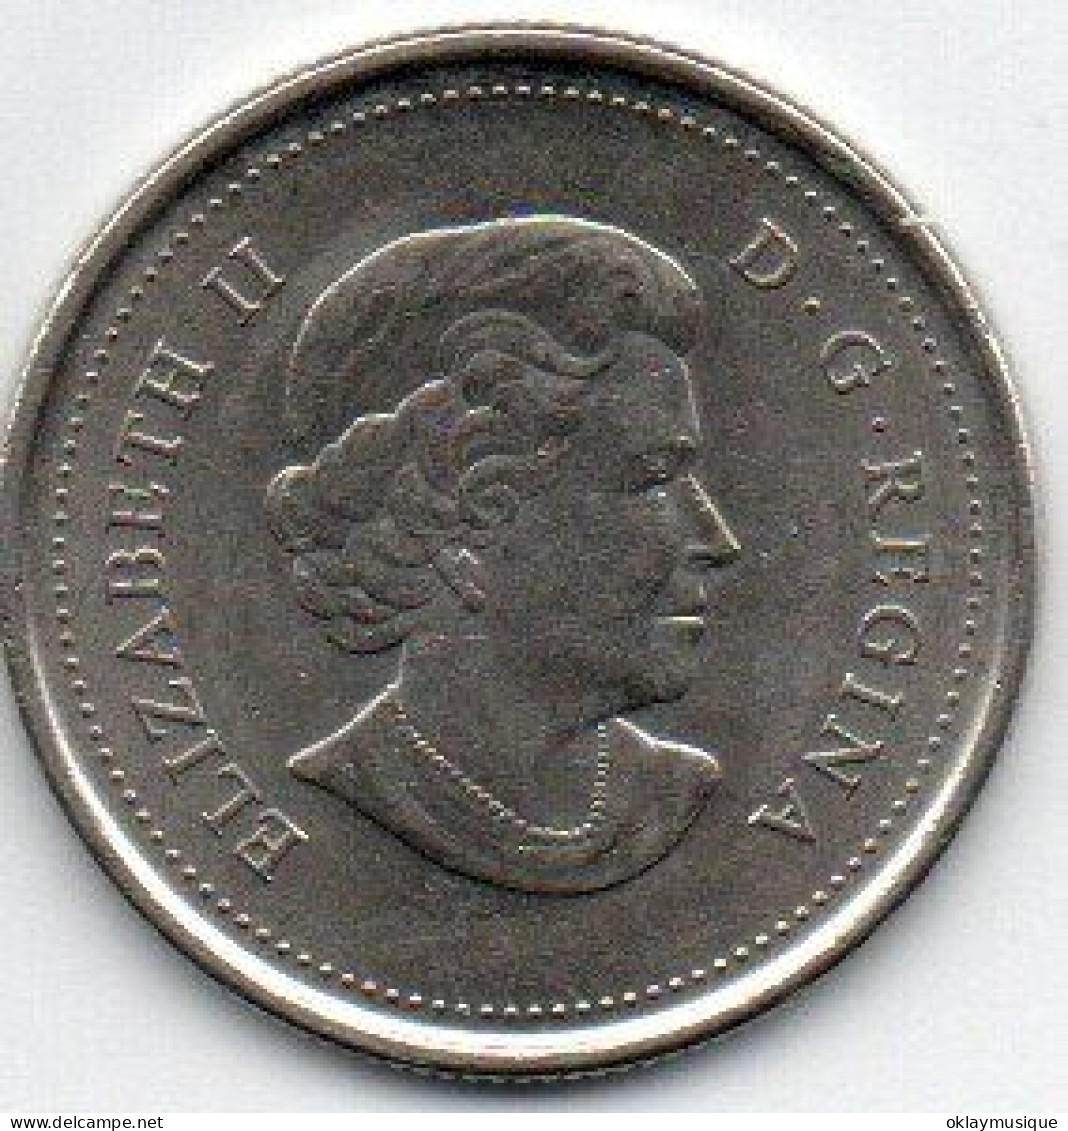 25 Cents 2011 - Canada